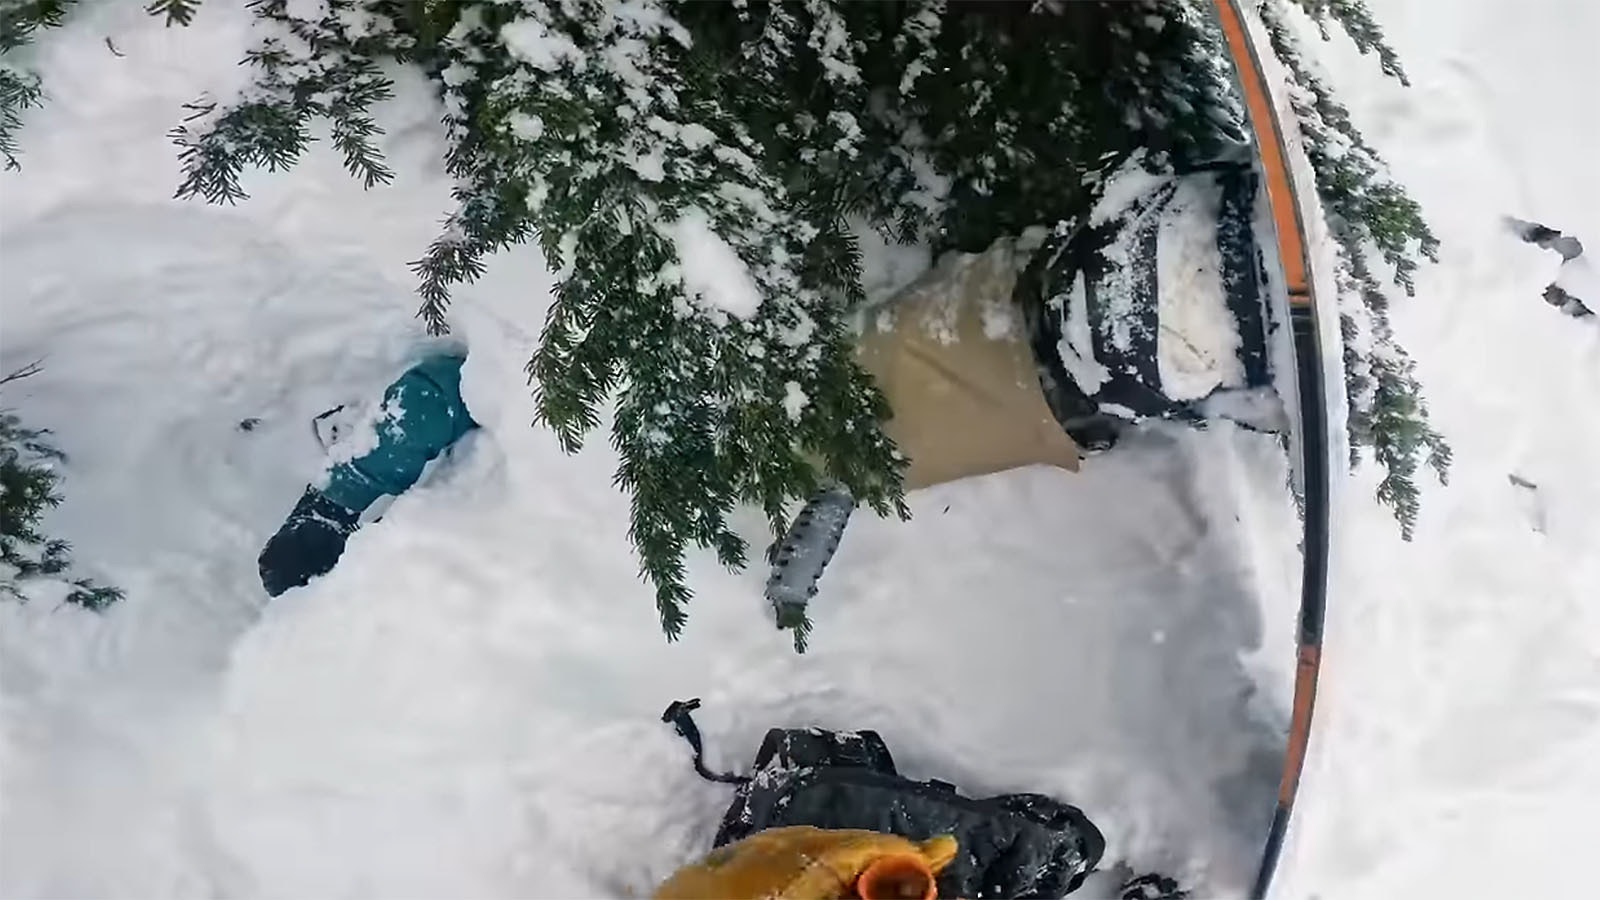 This image from Francis Zuber's GoPro camera shows Zuber working to dig an upside-down snowboarder out of a deep tree well.